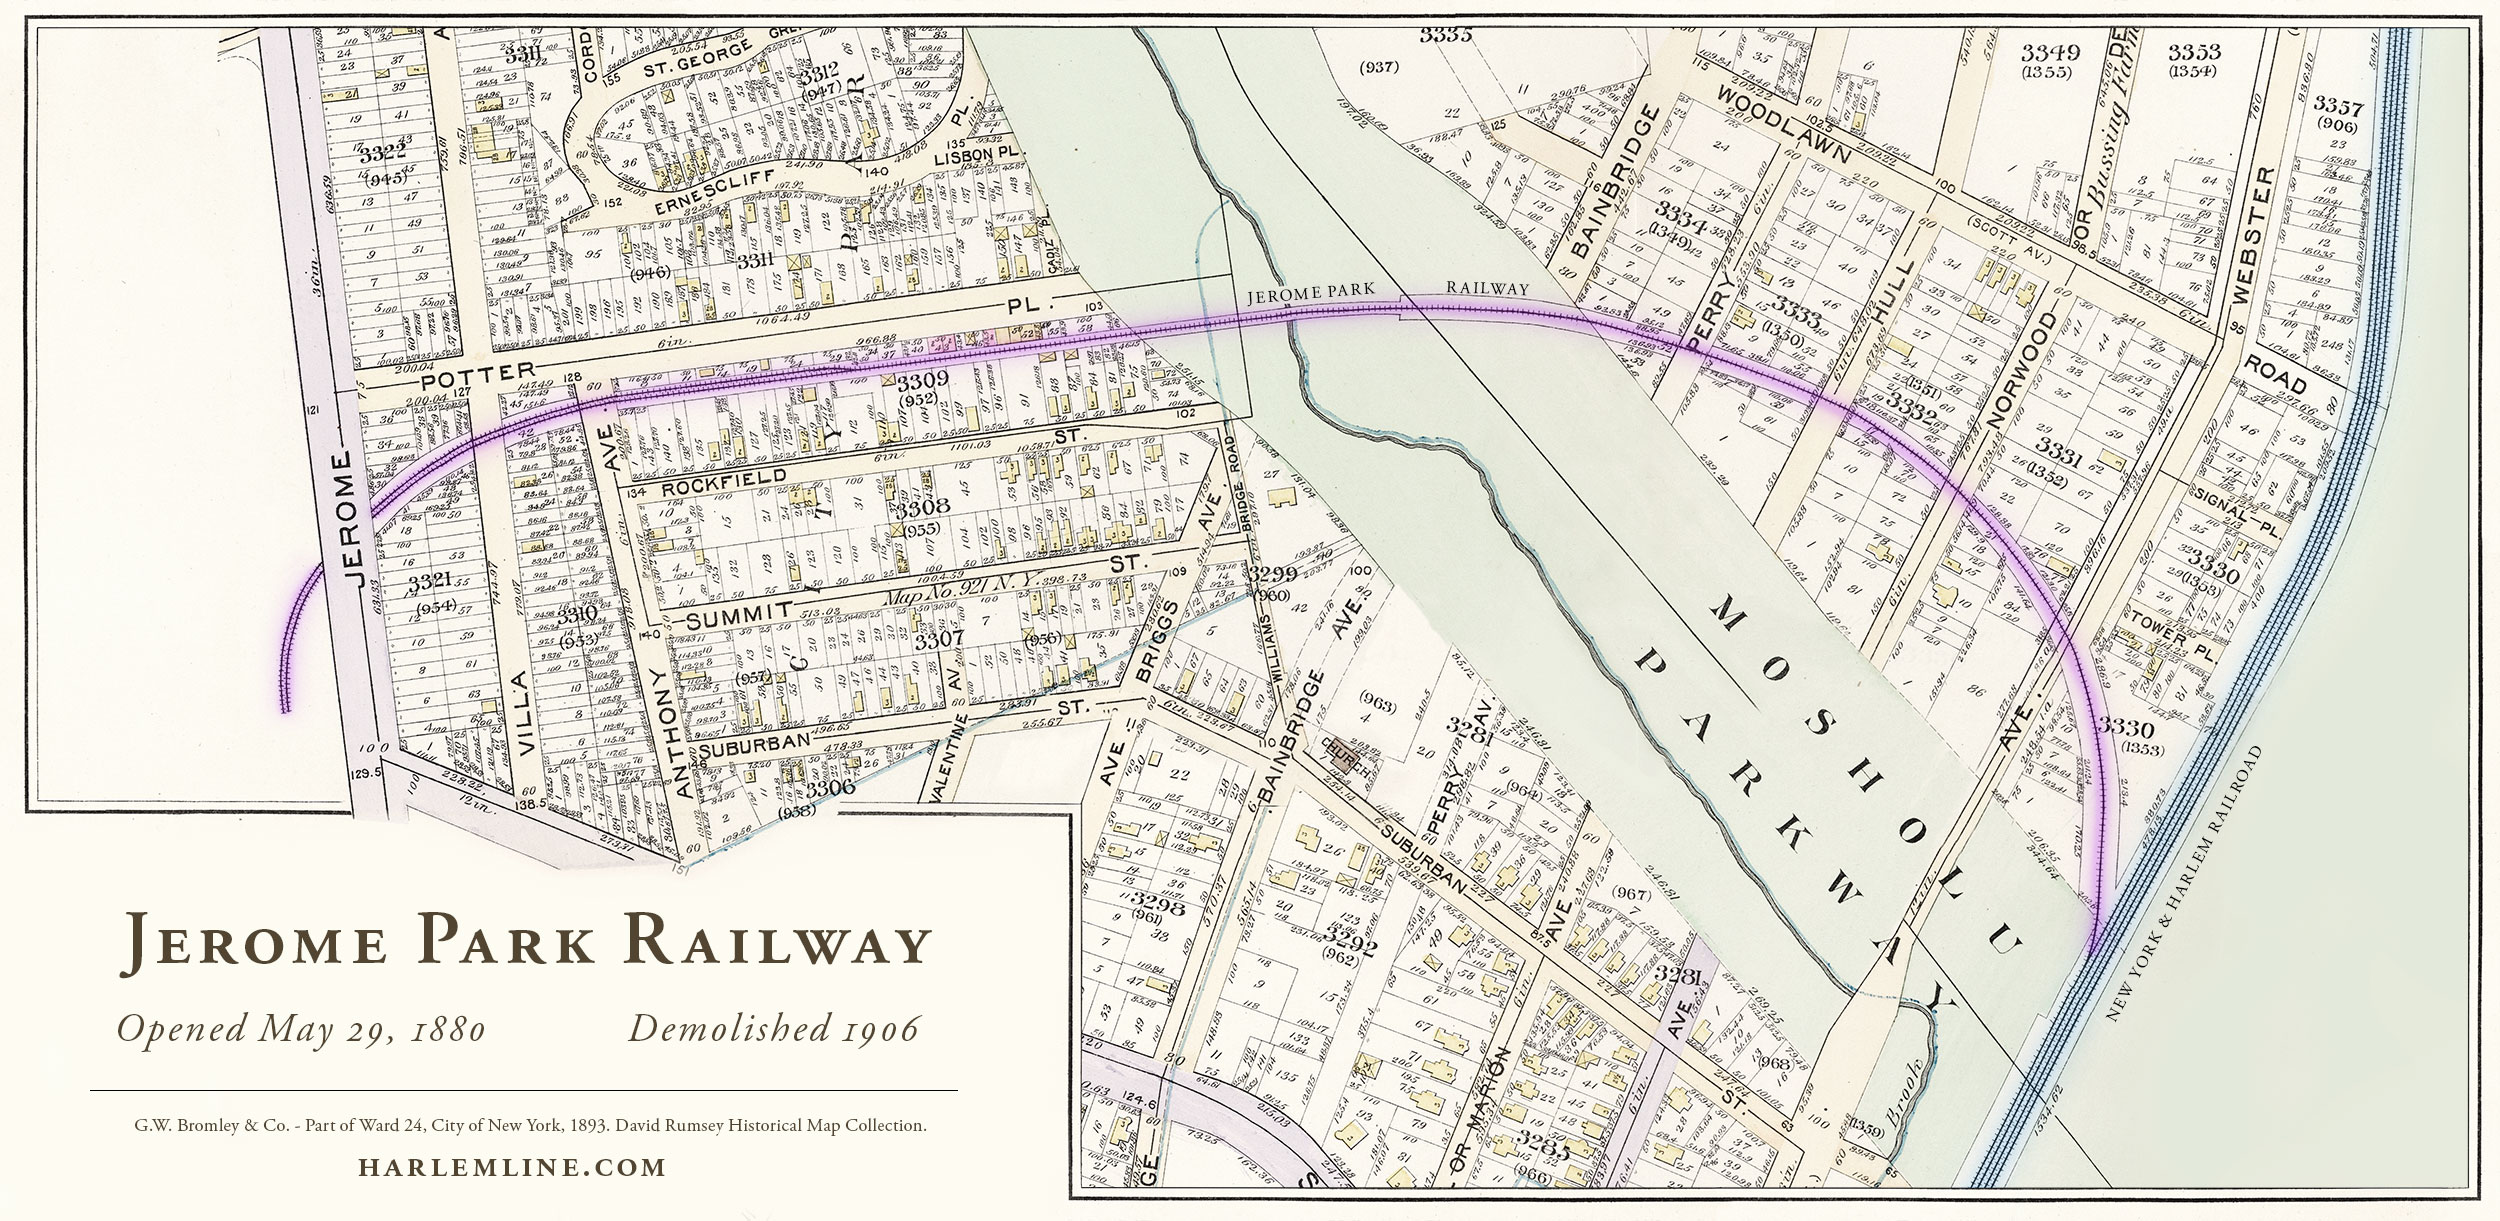 Map of the Jerome Park Railway and its connection to the Harlem